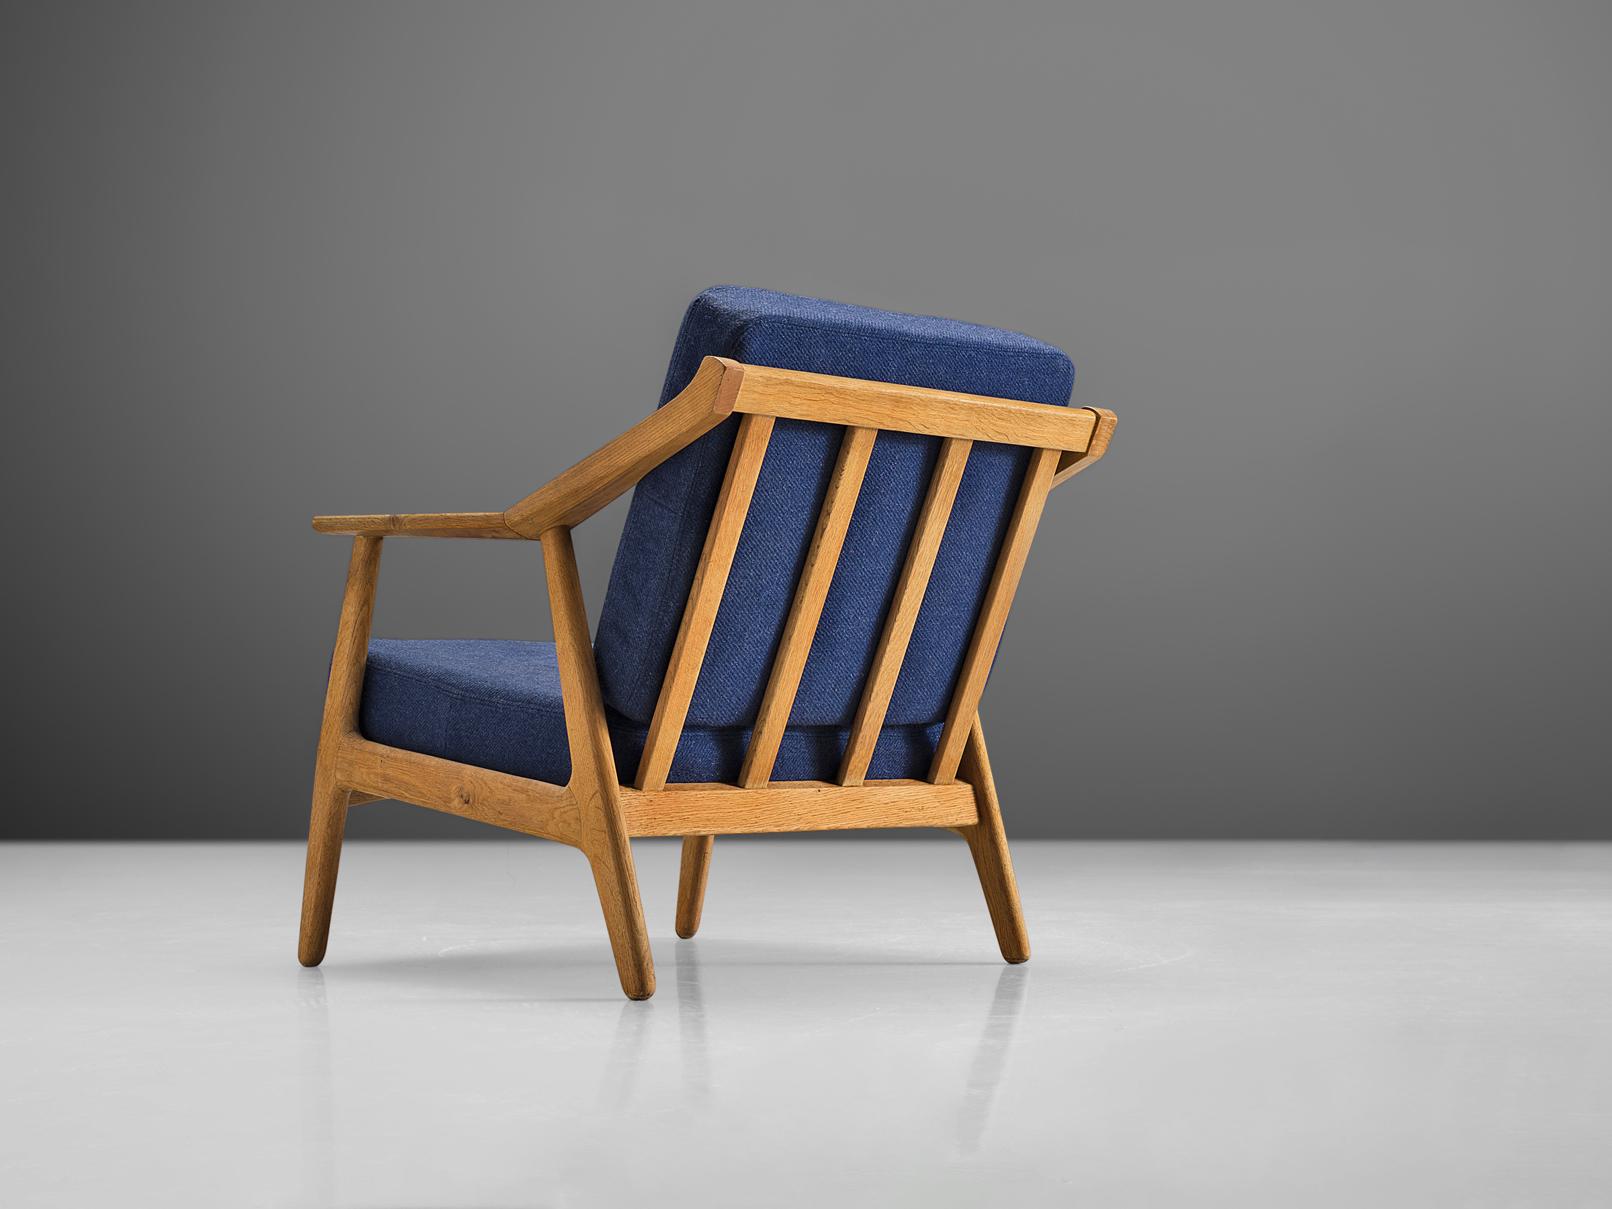 Armchair, oak, blue fabric, Denmark, 1960s

This sculptural armchair has a slatted back and four circular legs. The armrests are executed with an angle in the middle and this is also the place were the back legs join the frame. The solid oak frame